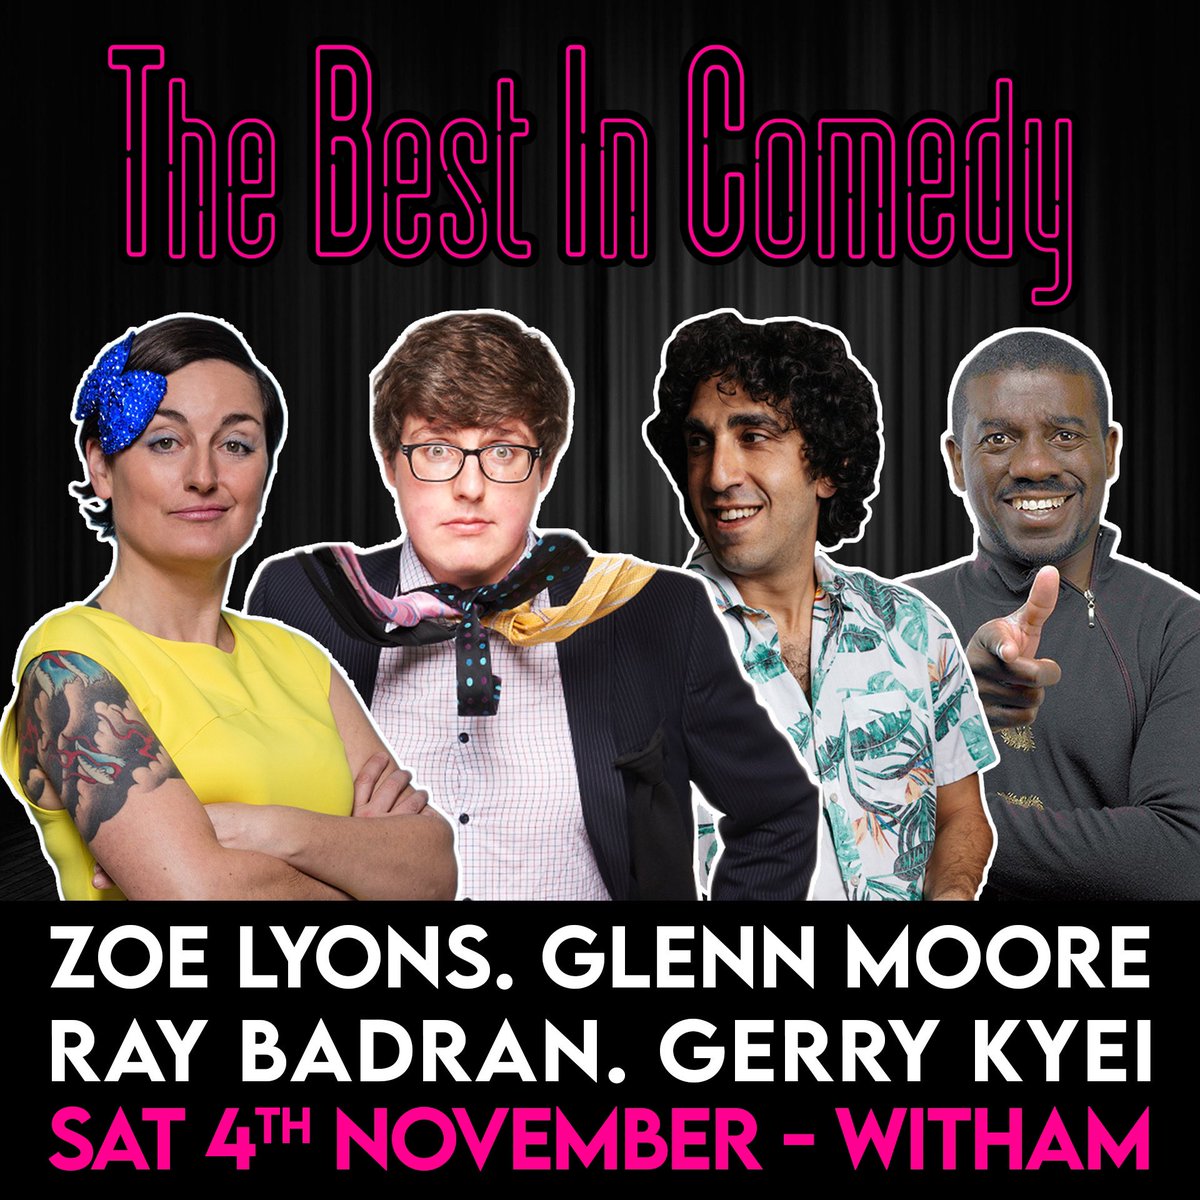 🔥We can’t wait to return to @WithamPH in November, with this funny bunch! 🔸@zoelyons 🔸@TheNewsAtGlenn 🔸@GerryKcomic 🔸Ray Badran Tickets & Details 👇 🎟 angliacomedy.com/wph4 👈 Will be a fun one… 😀